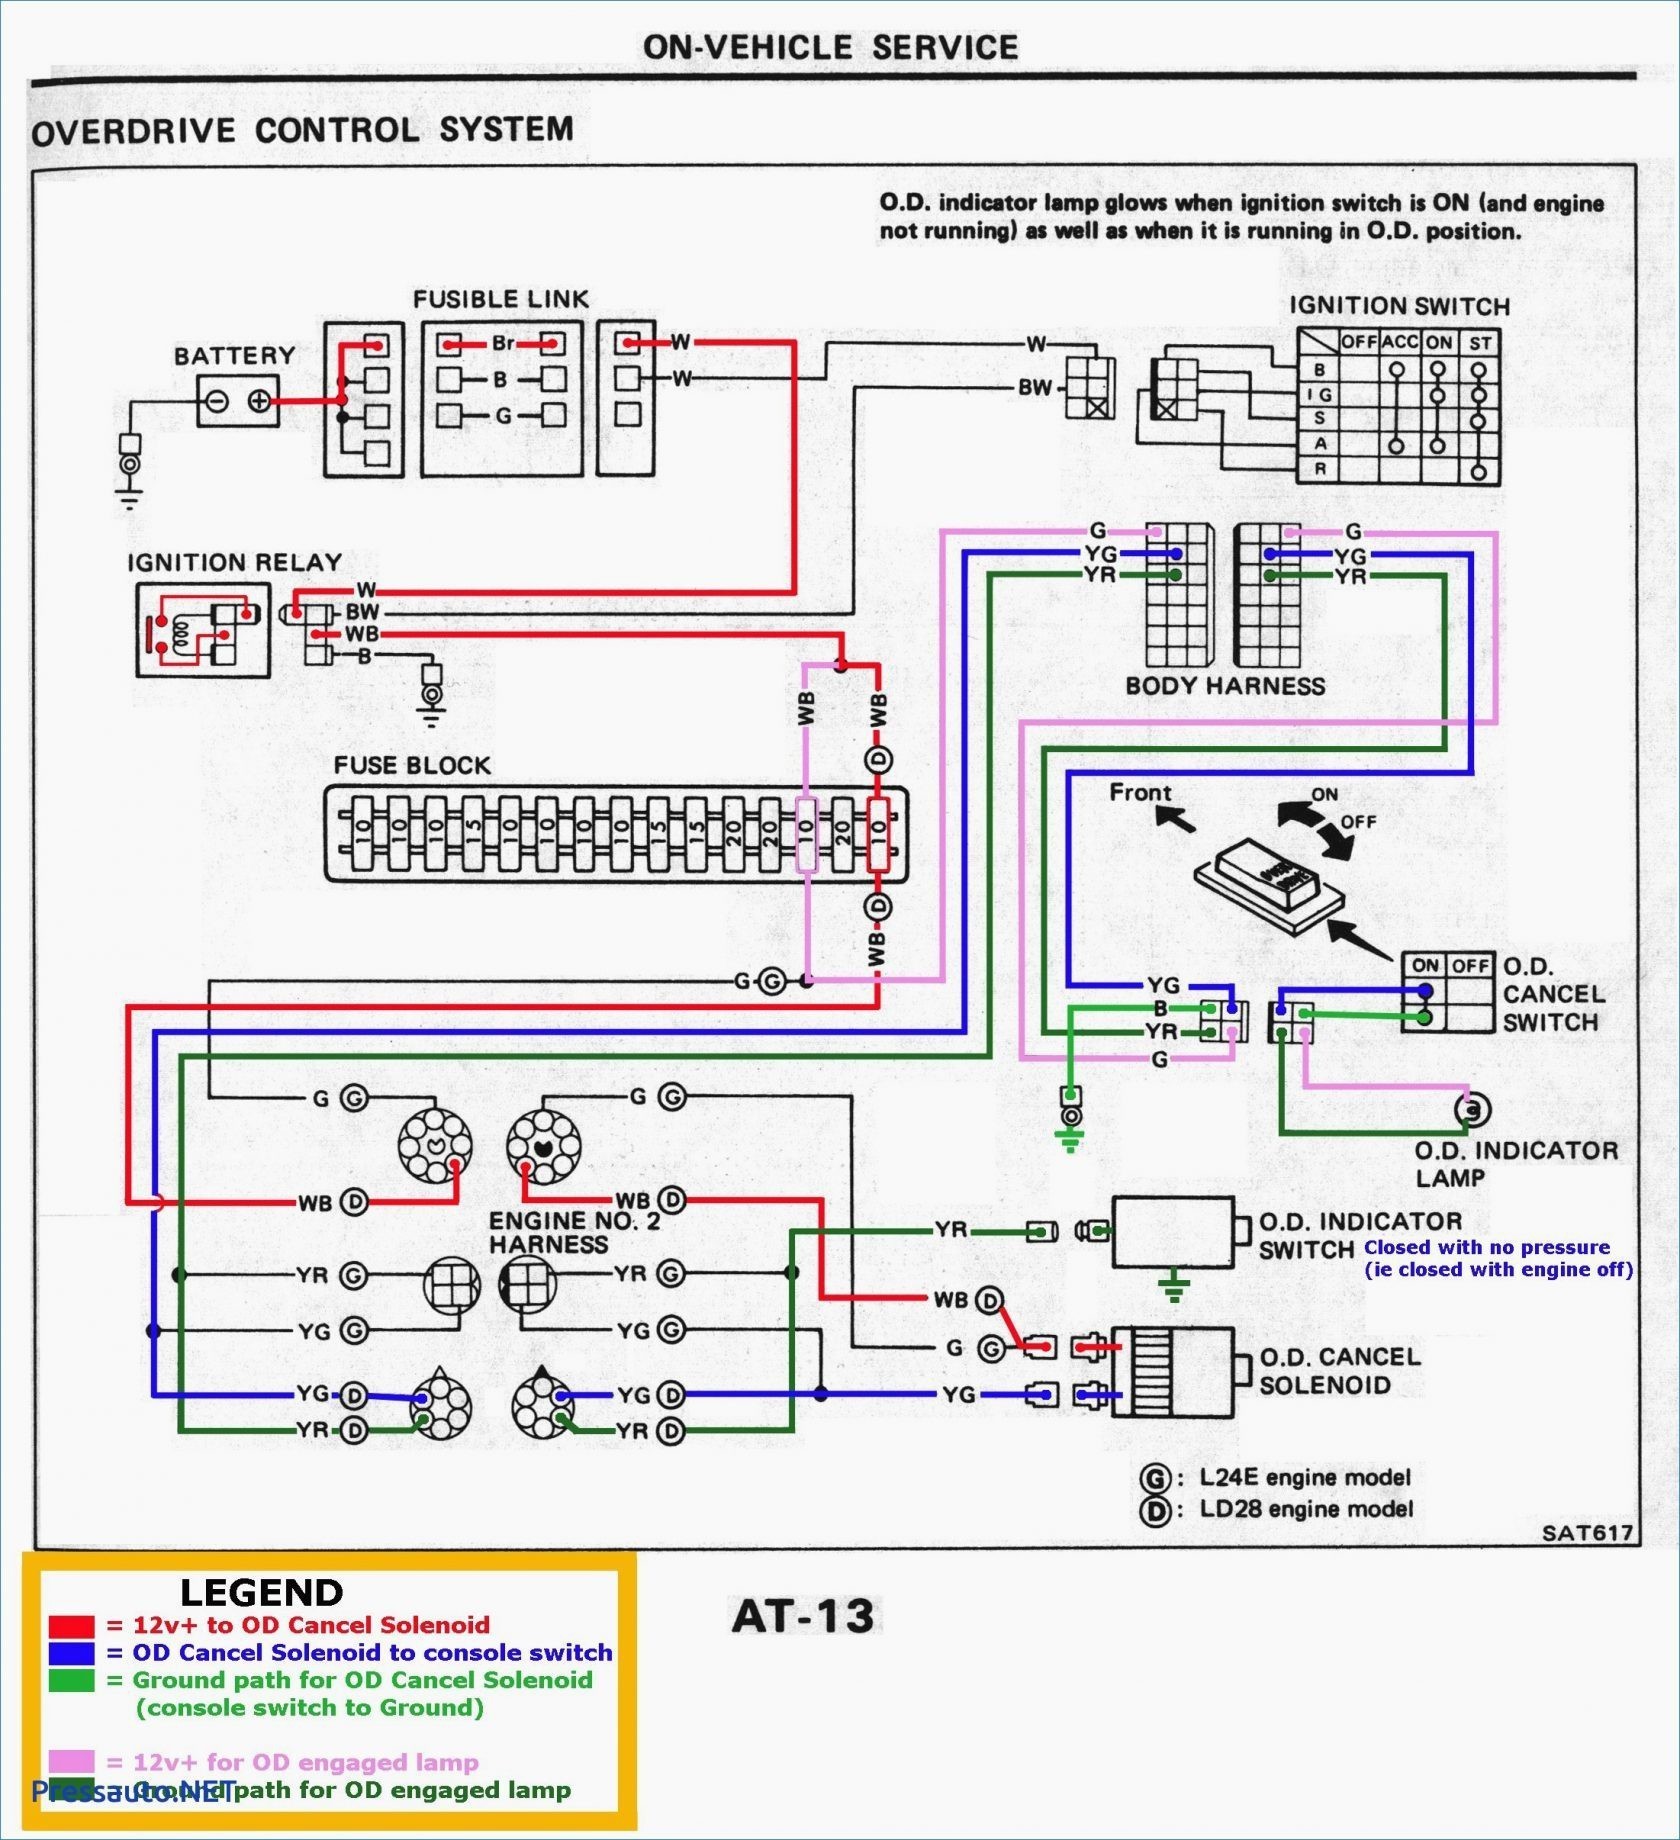 Kib Systems Monitor Panel Schematic Best Of | Wiring ...